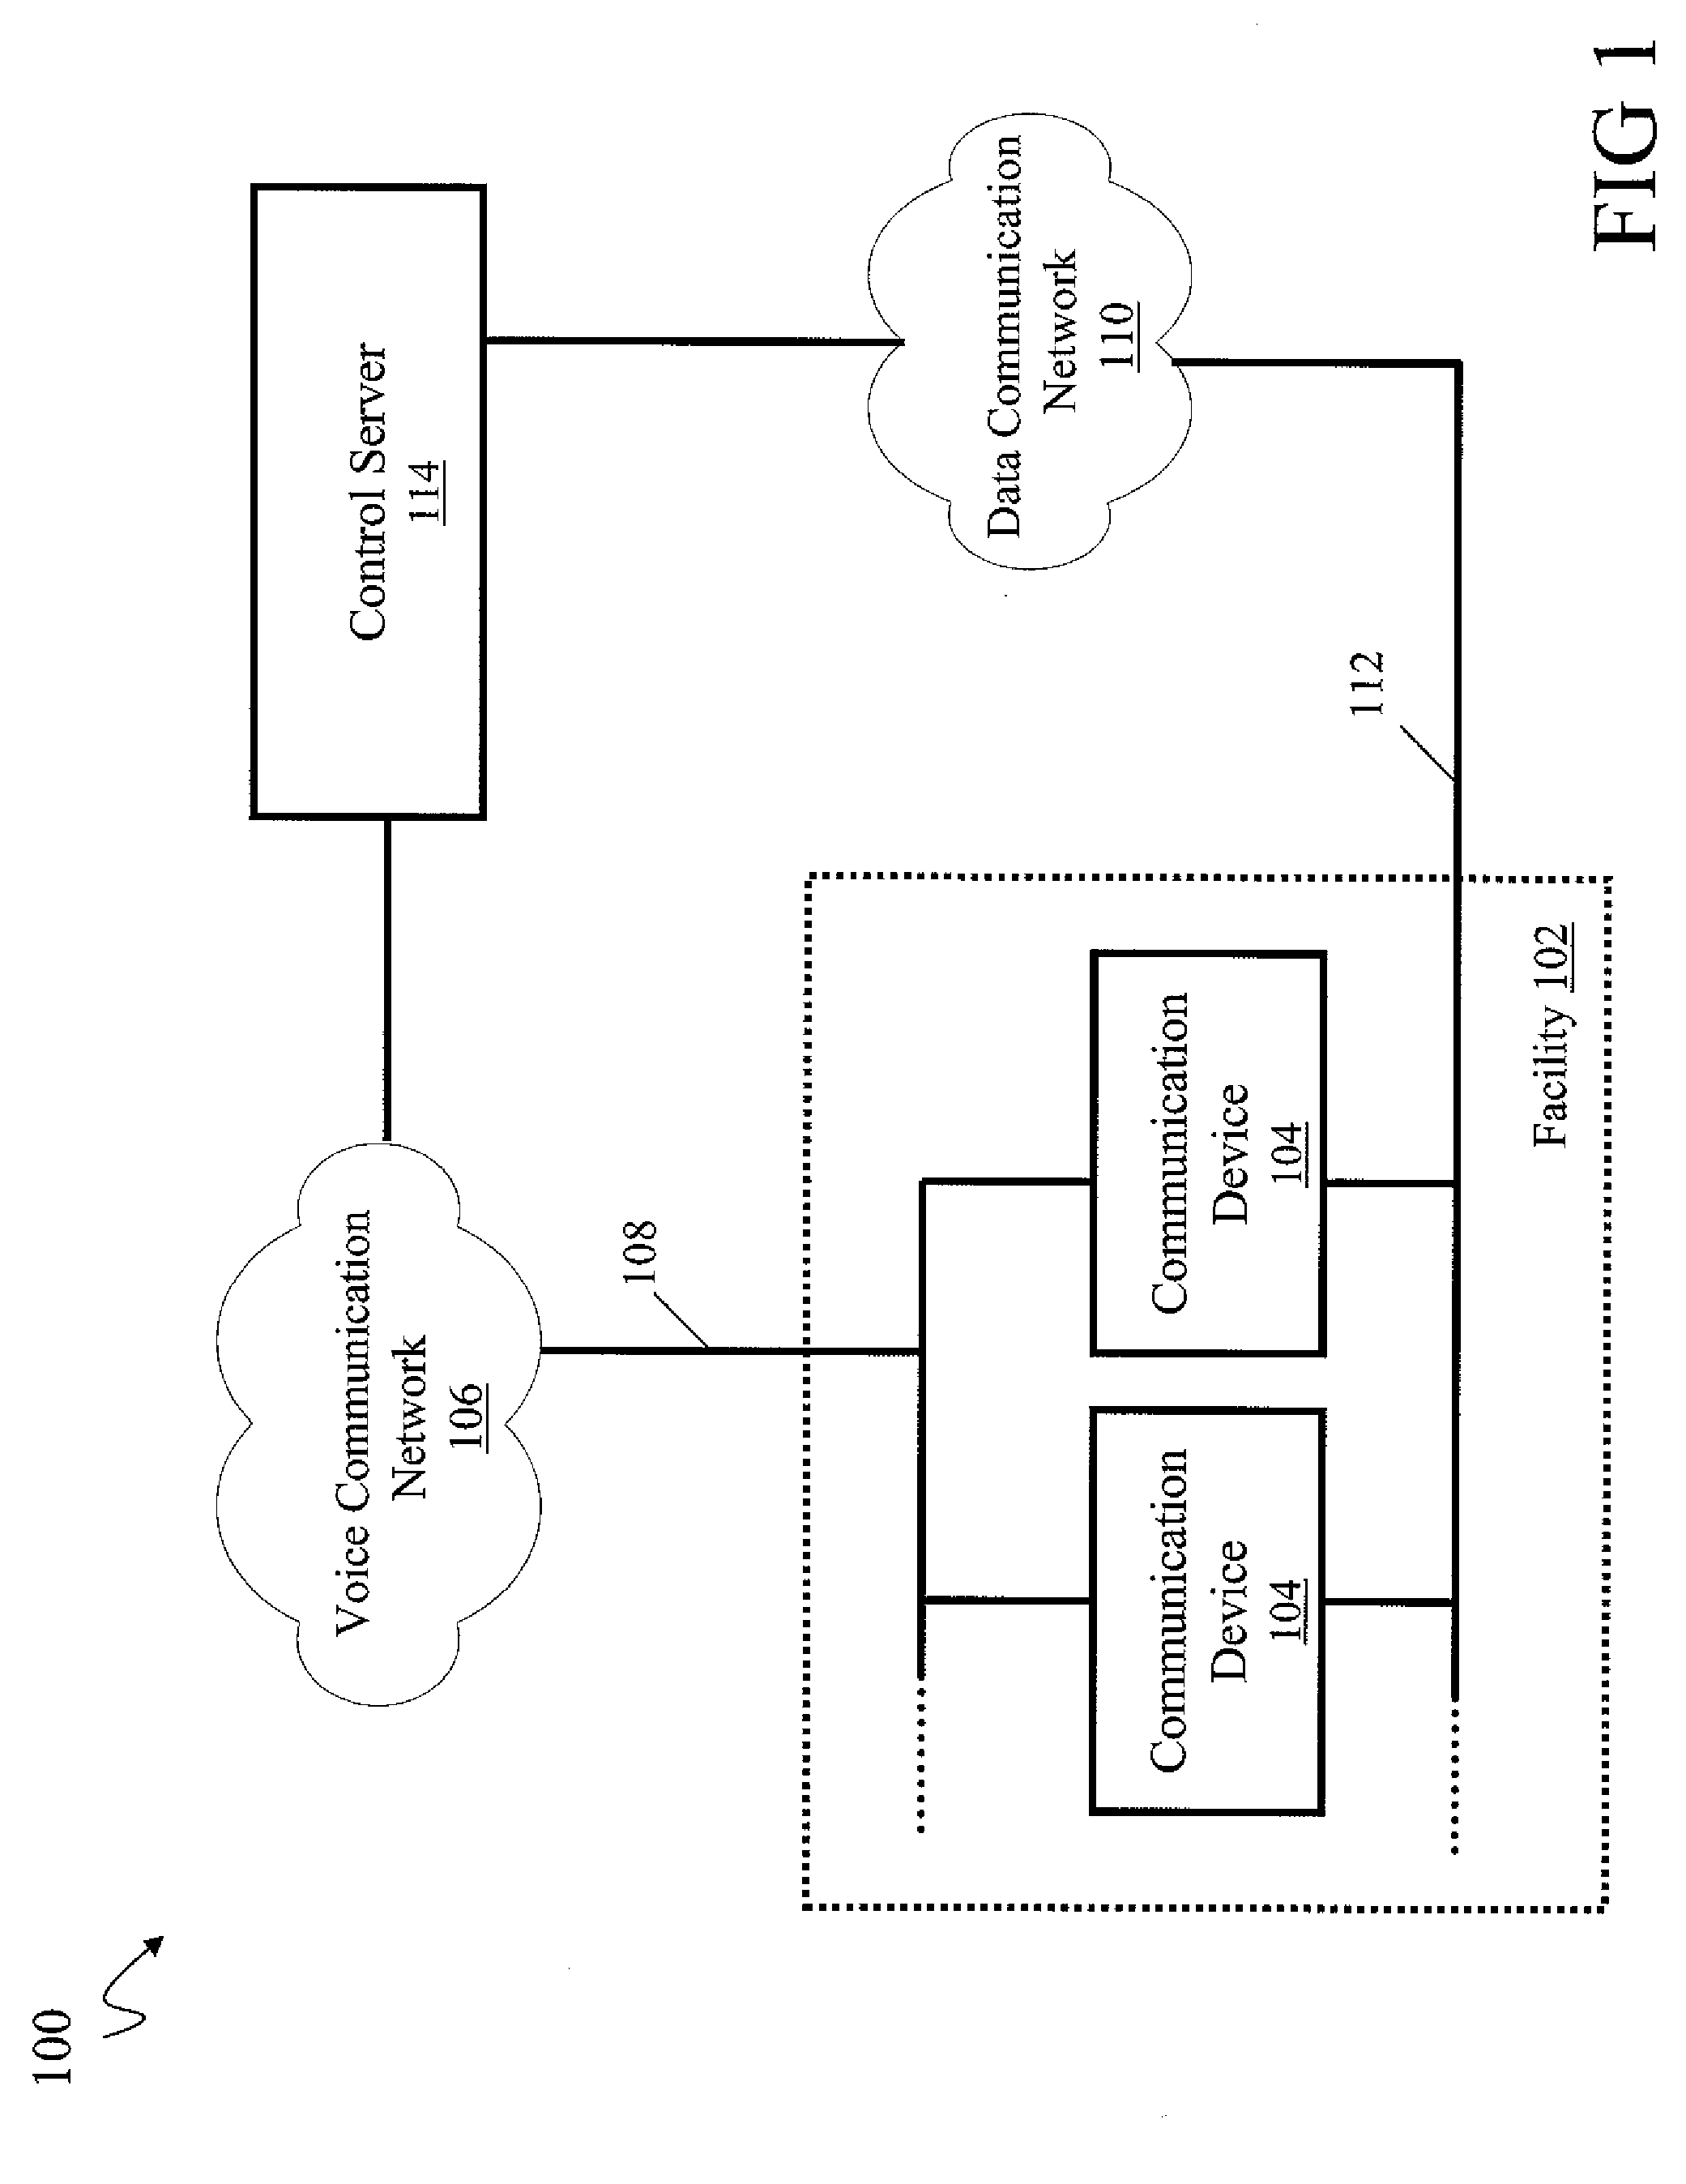 Method, system and apparatus for communicating data associated with a user of a voice communication device